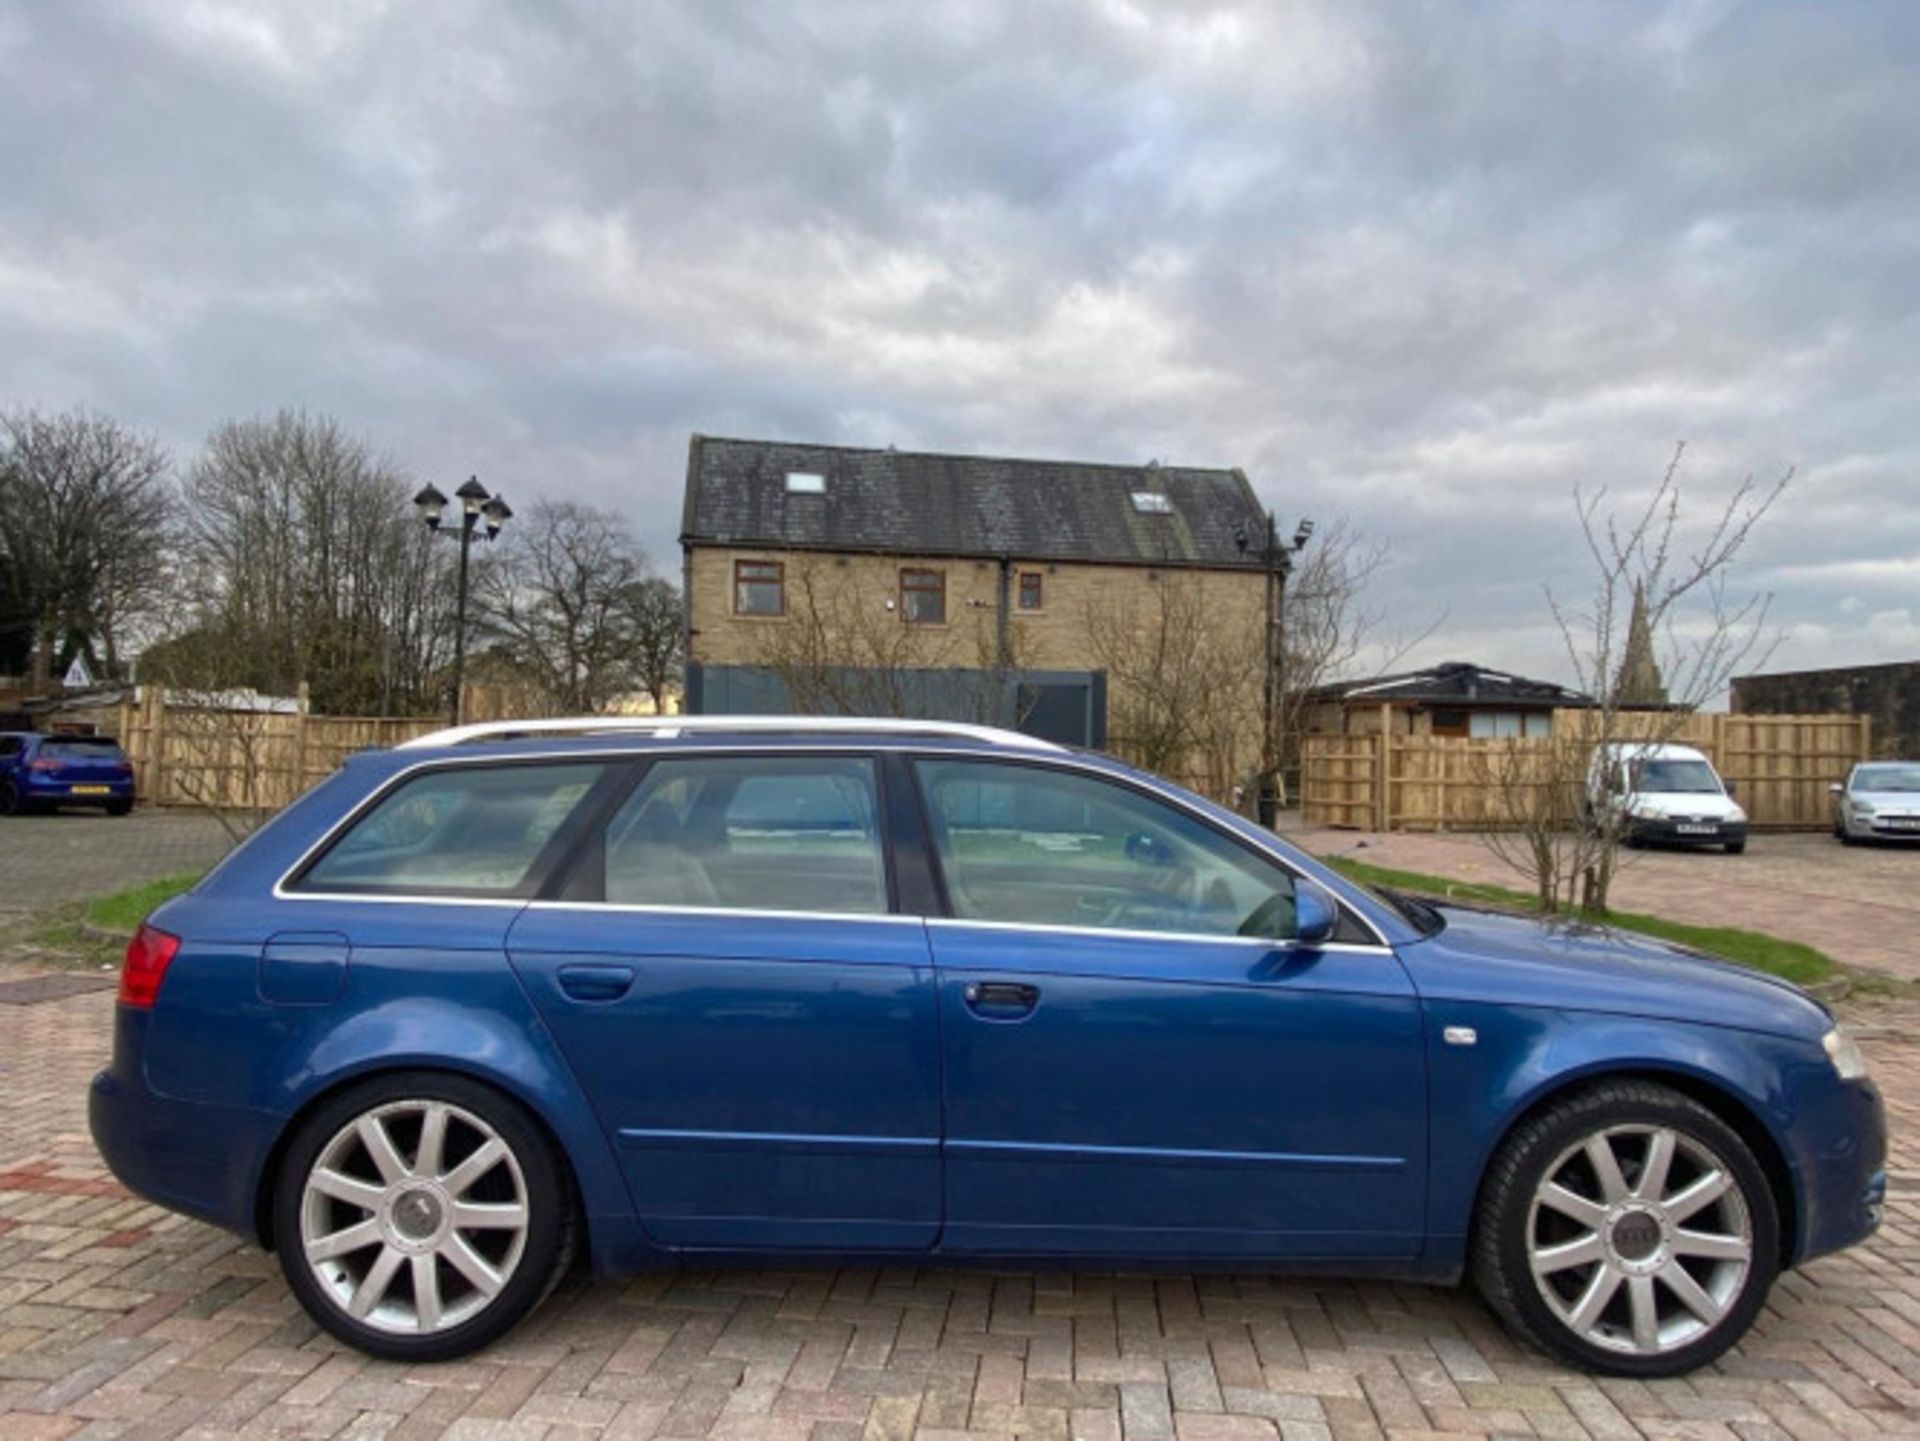 AUDI A4 AVANT 1.9 TDI SE 5DR ESTATE - RARE AND RELIABLE LUXURY WAGON >>--NO VAT ON HAMMER--<< - Image 61 of 63